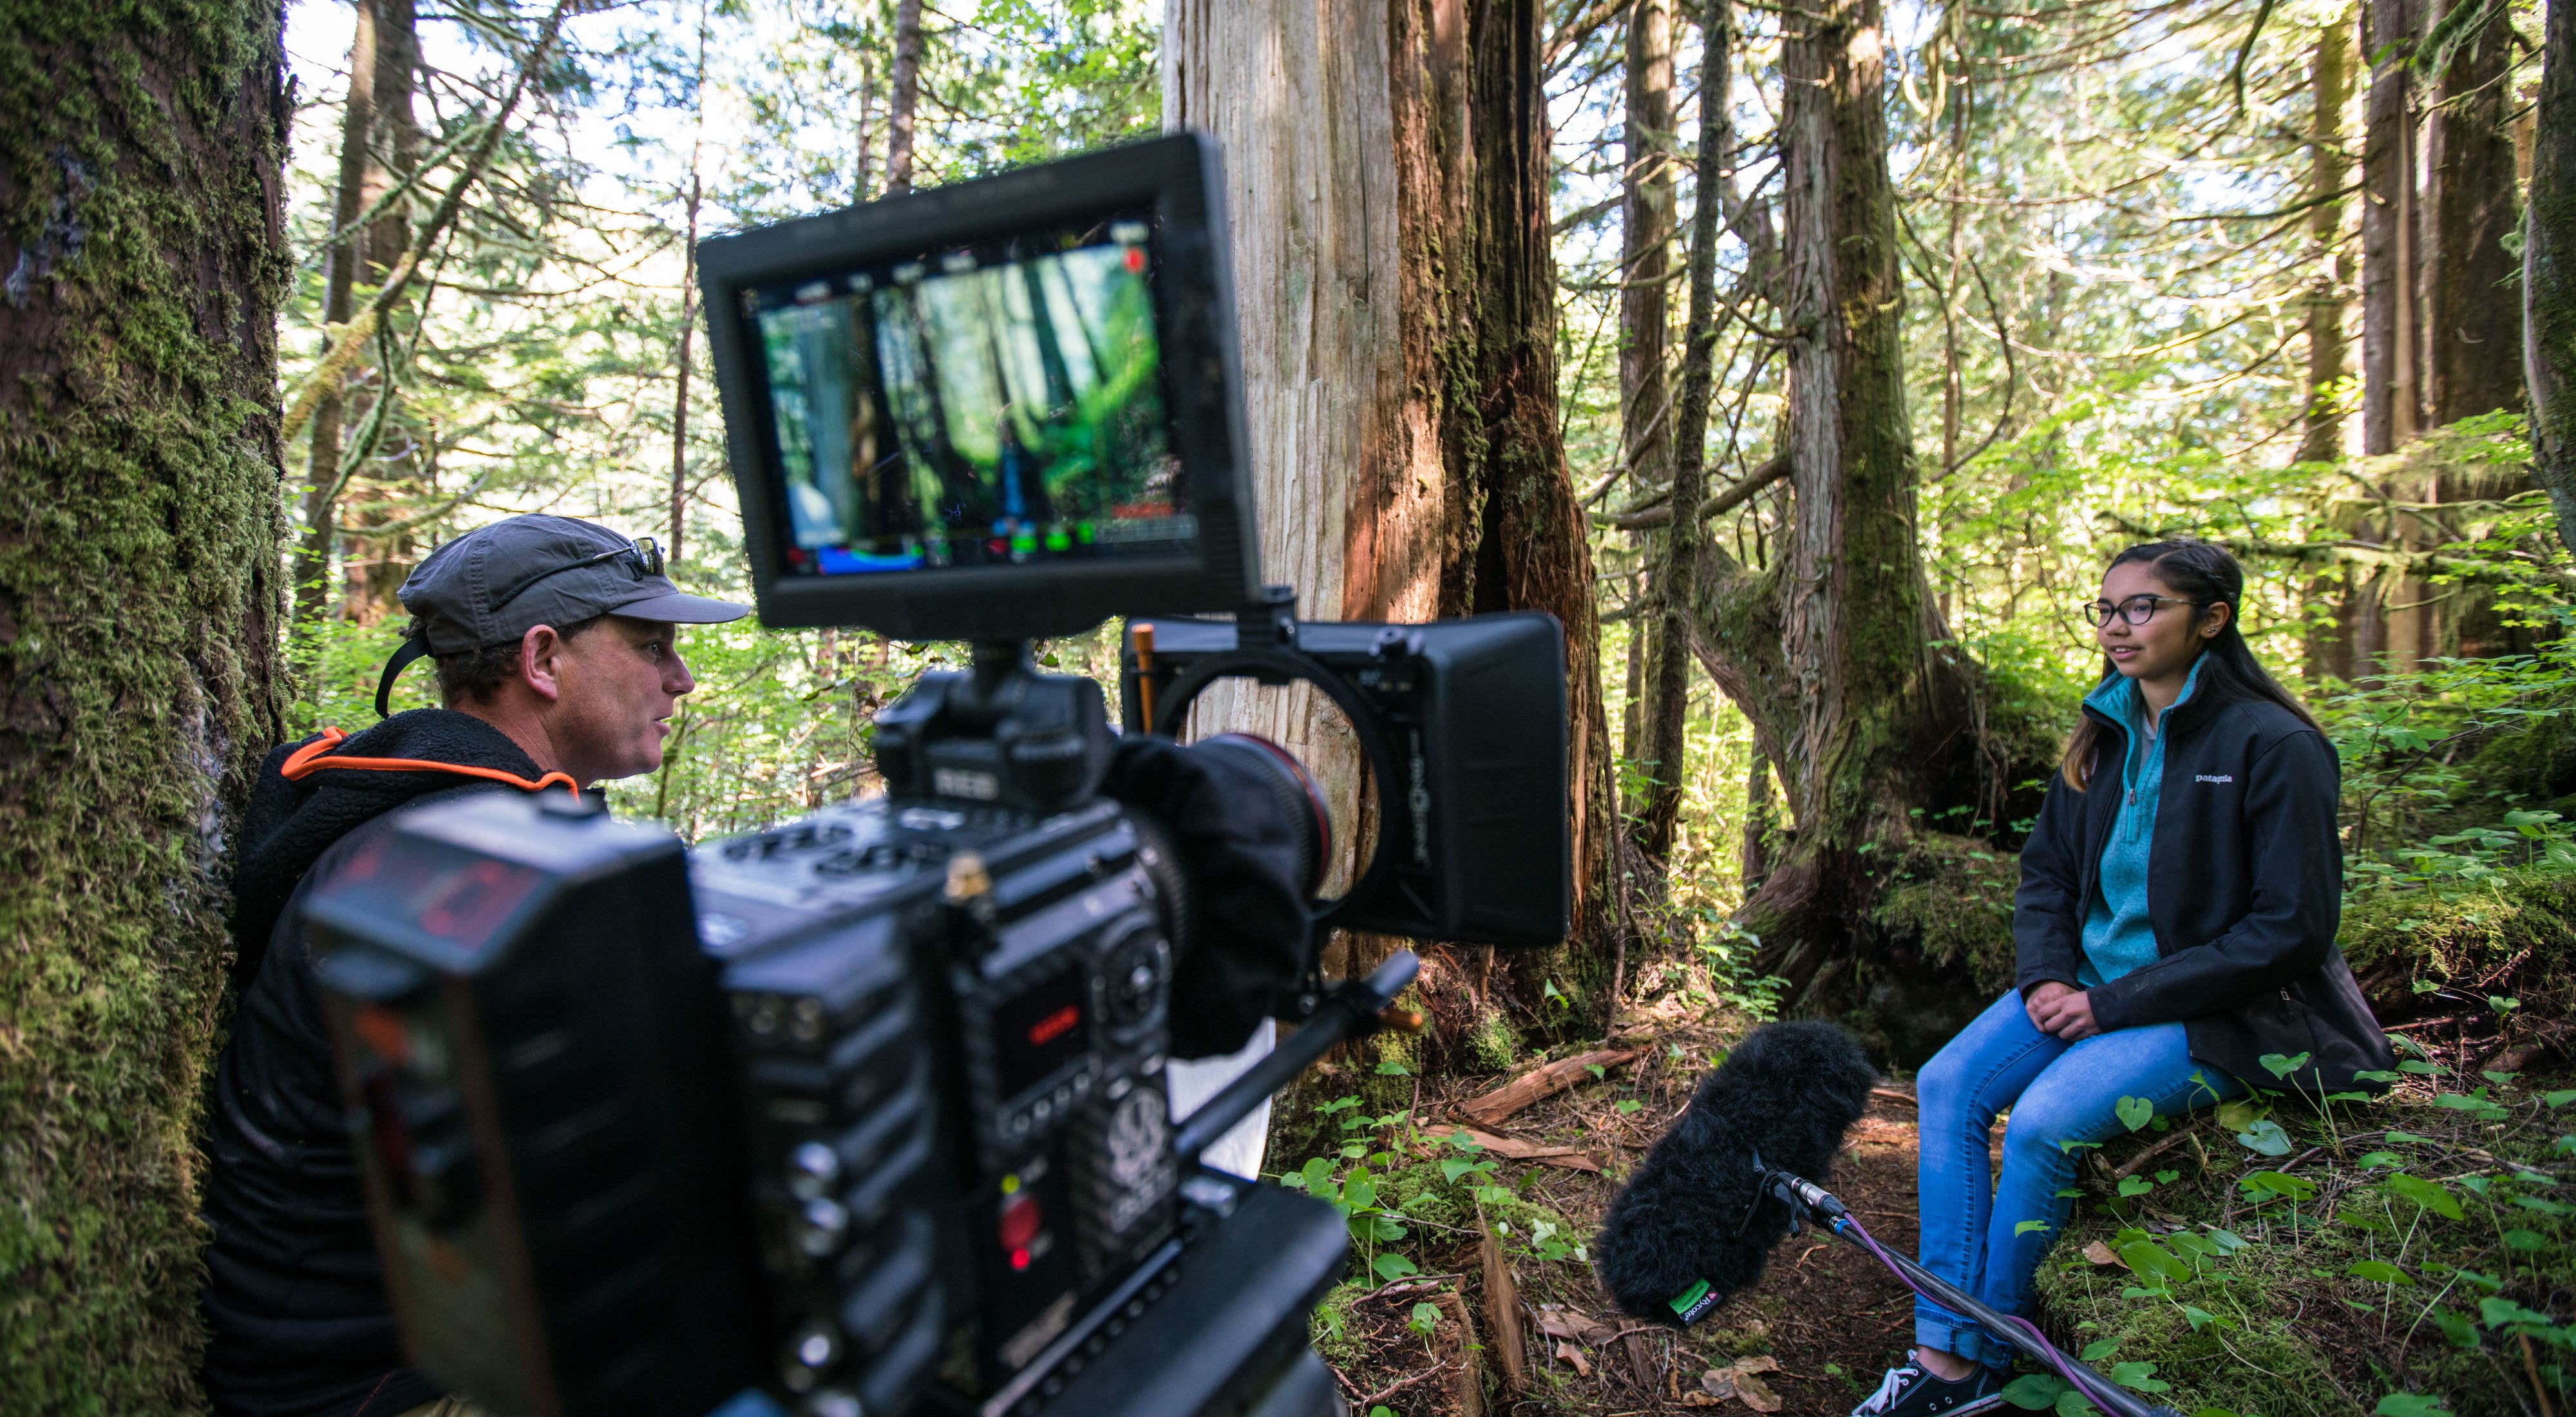 Mercedes Robinson-Neasloss was interviewed for a film about the Great Bear Rainforest, where her people have stewarded the land and water for thousands of years.